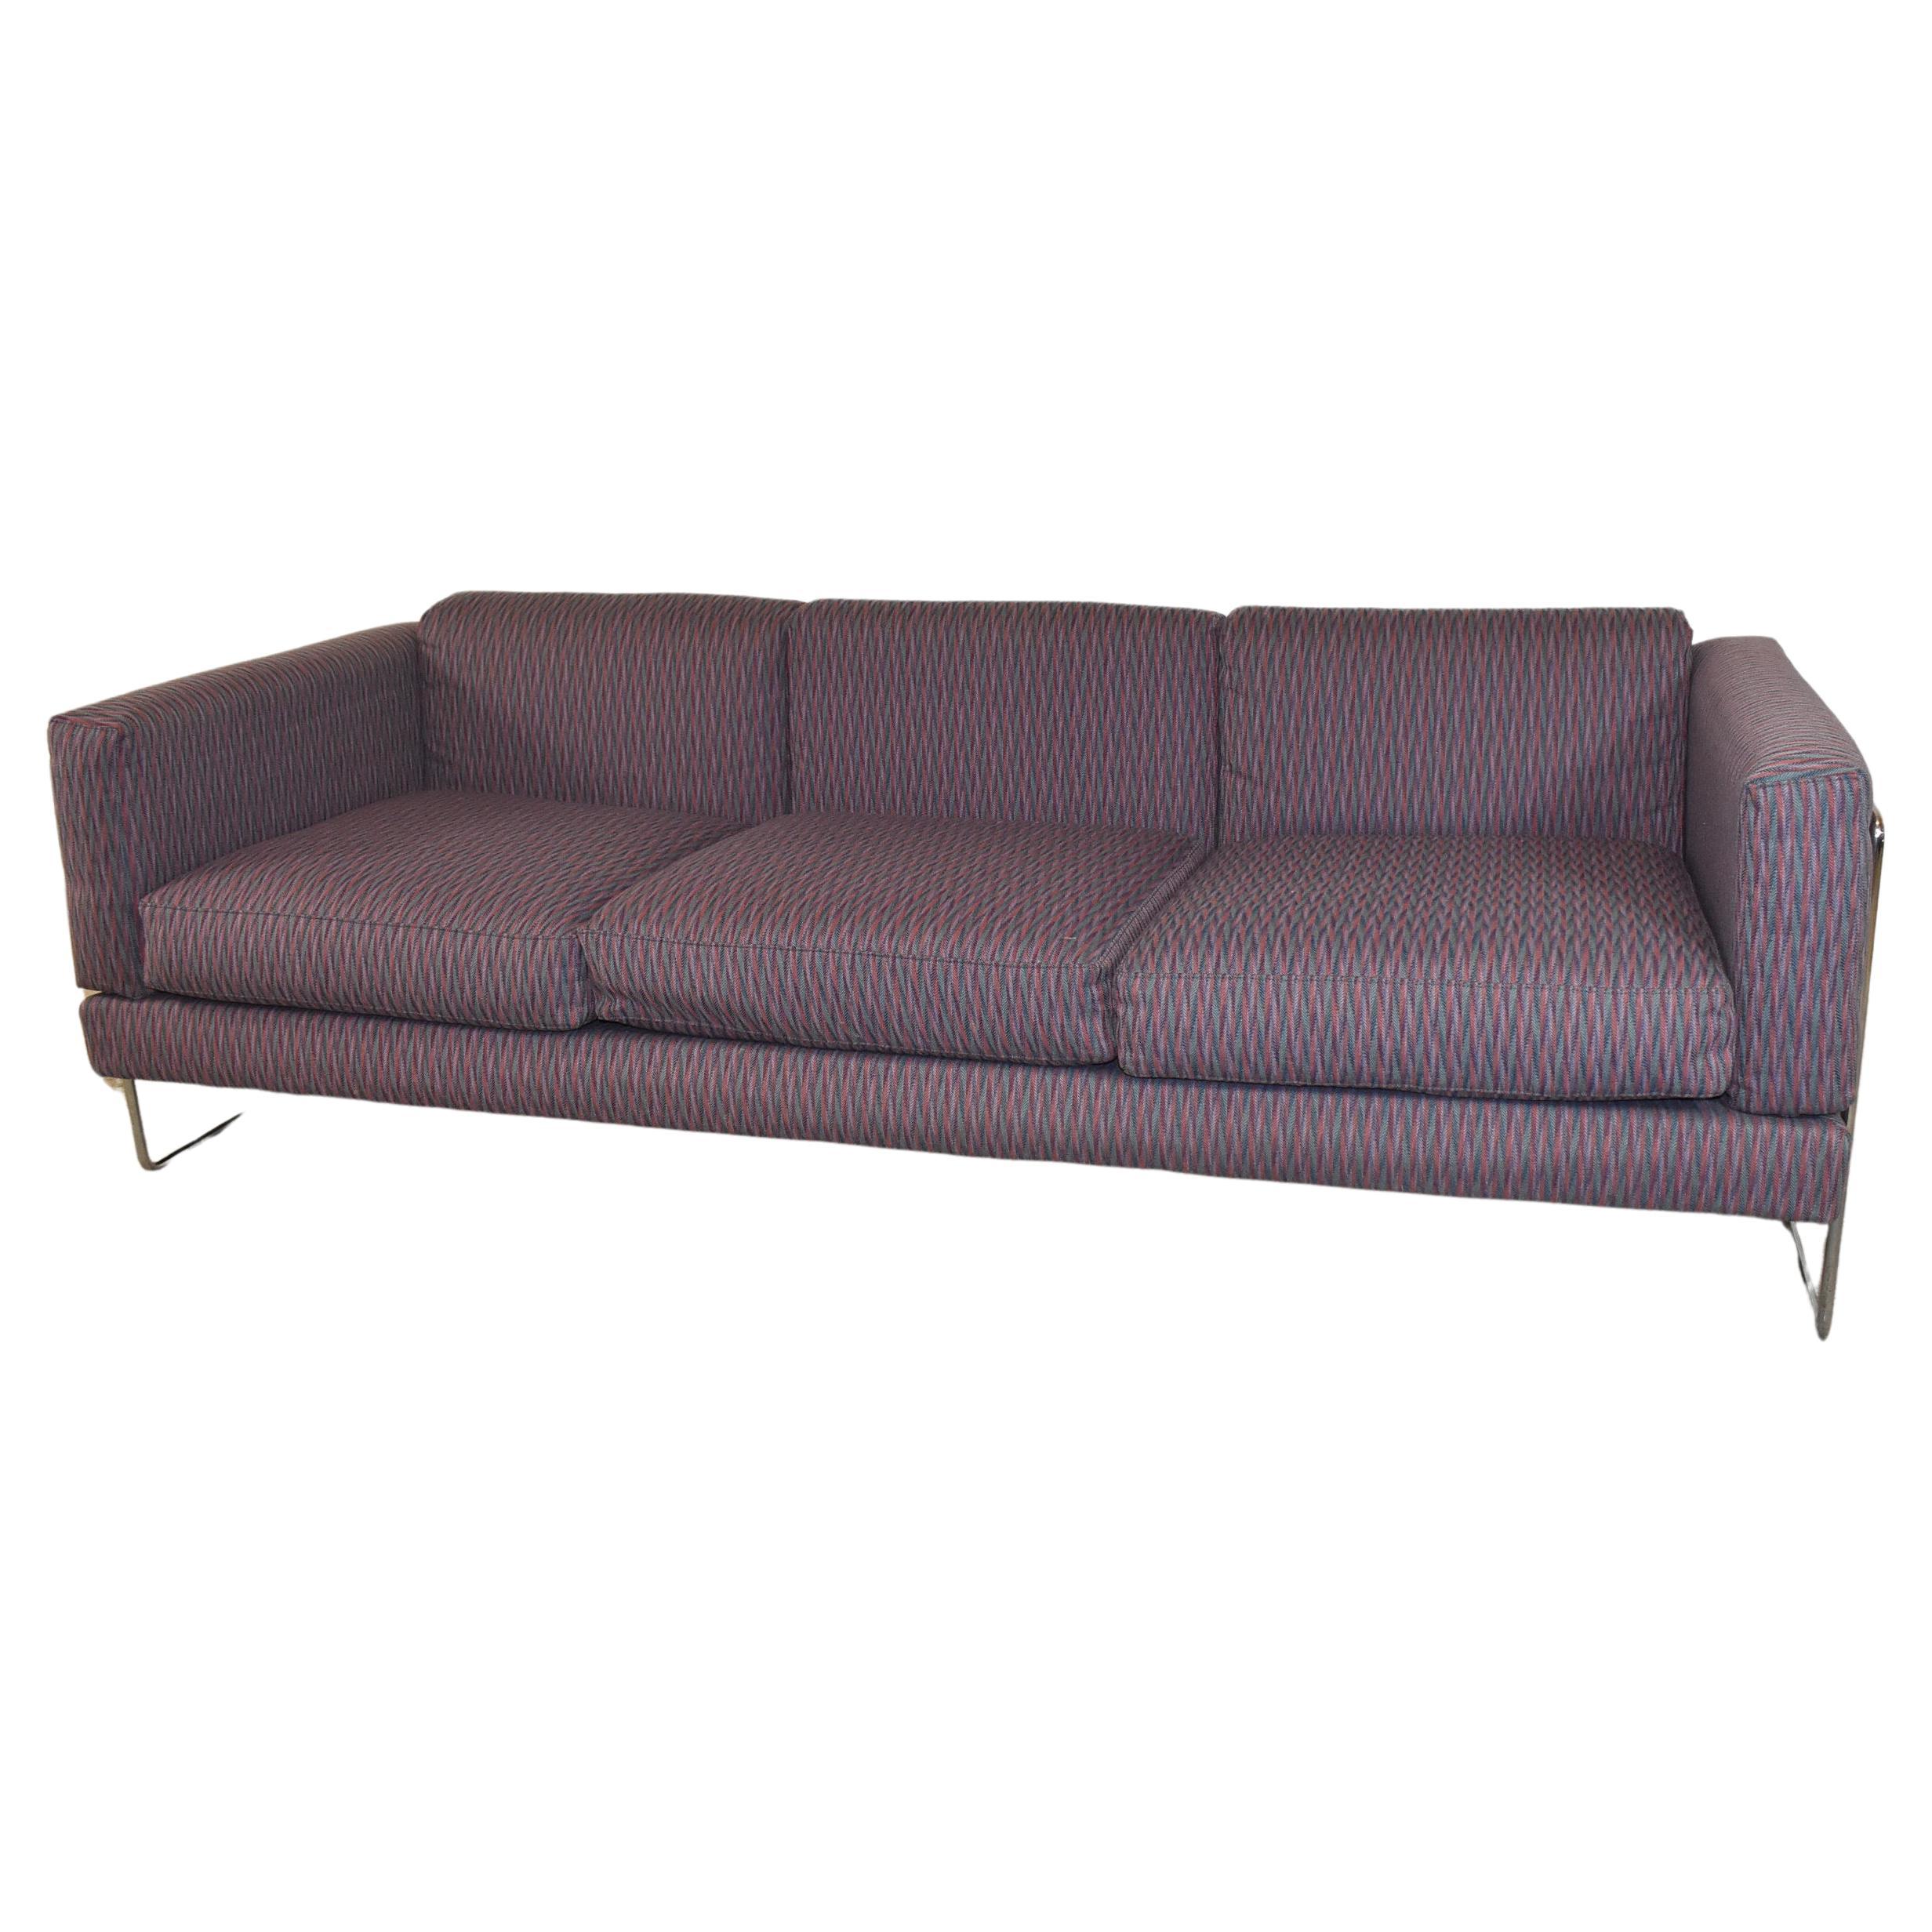 Pen Club Sofa with Chrome Frame by Kwok Hoi Chan For Sale